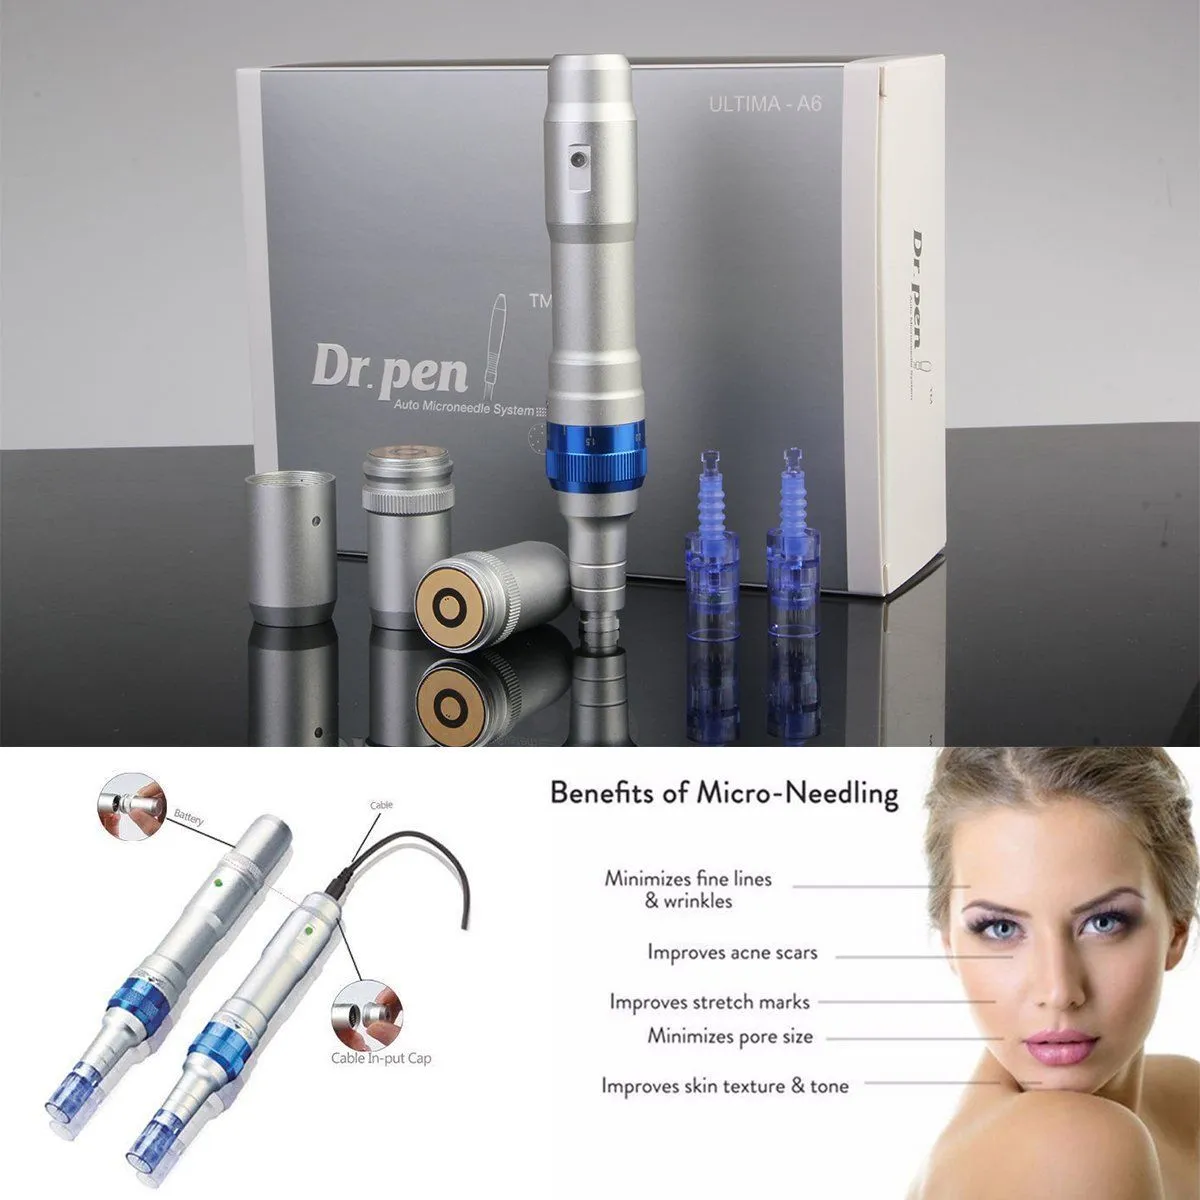 microneedling doctor derma roller Rechargeable Microneedle Dr. Pen ULTIMA A6 with needle cartridges for scar removal